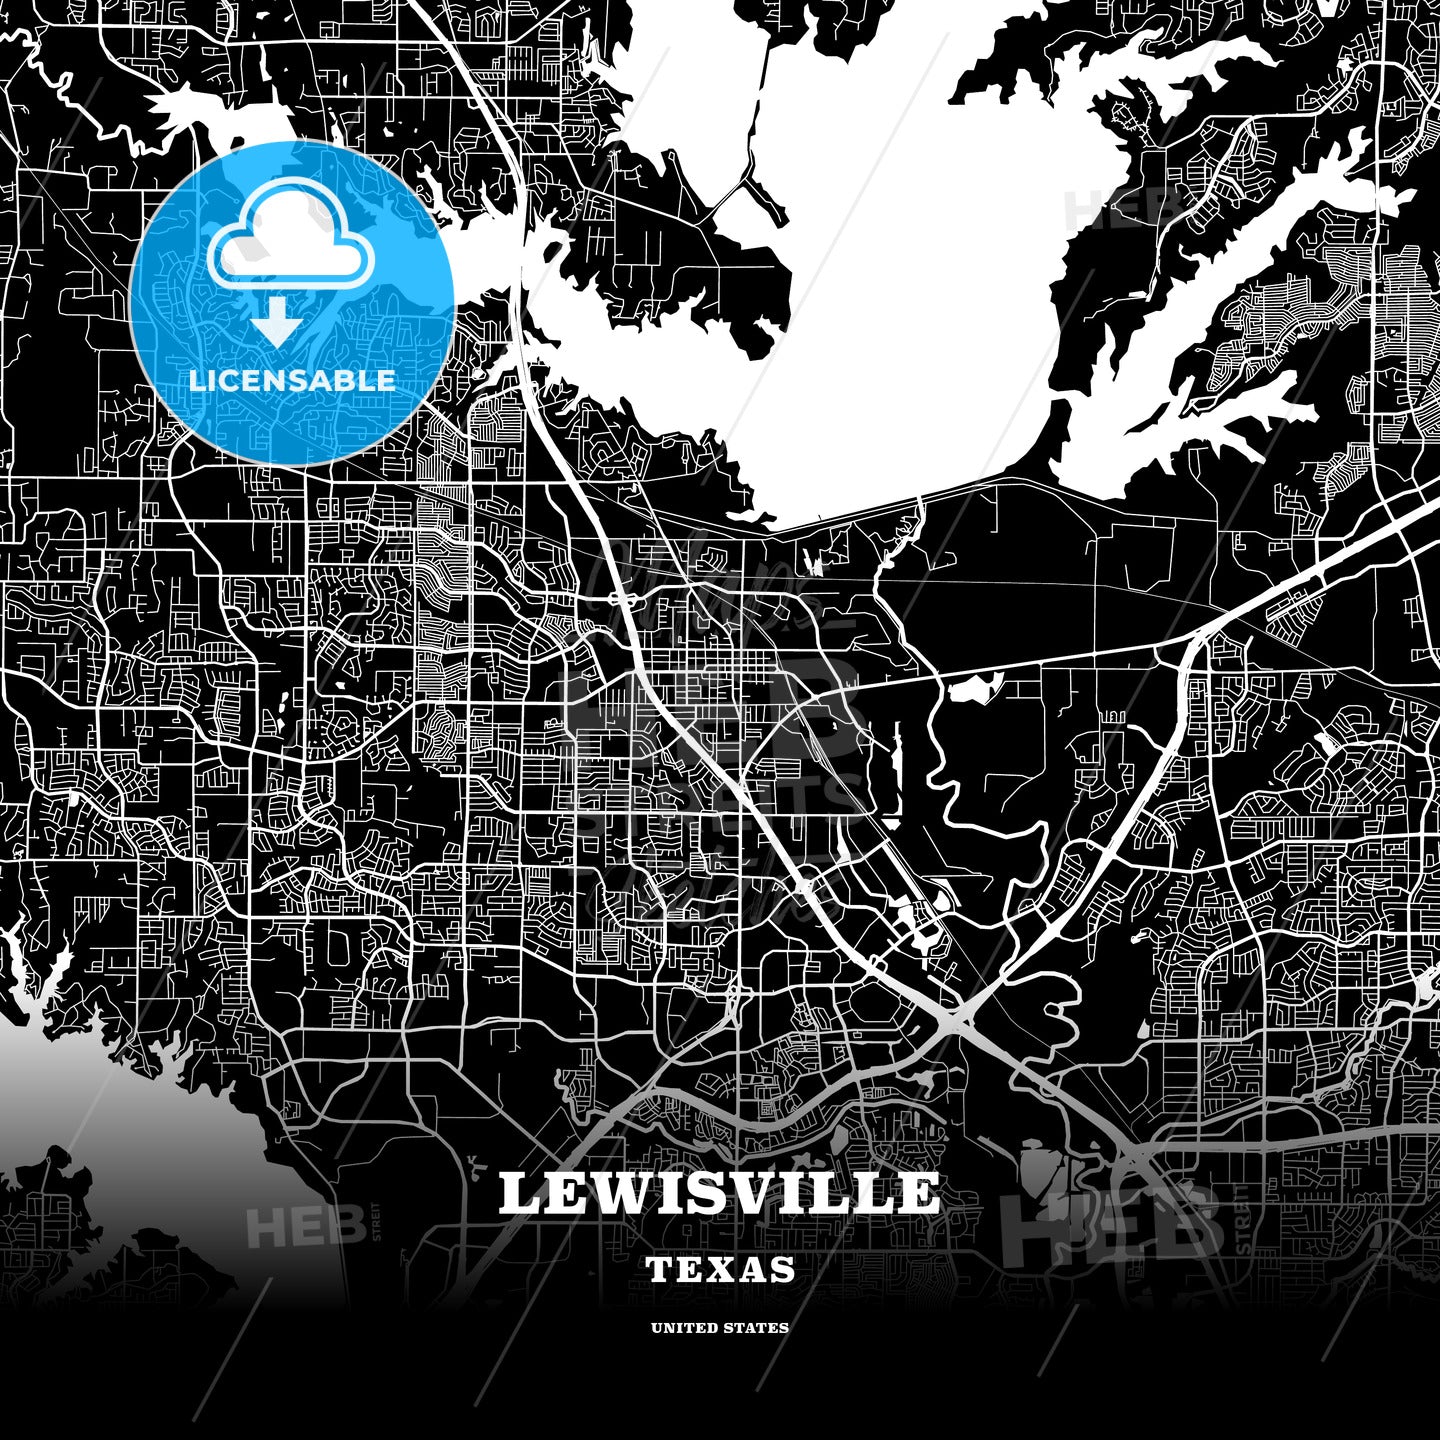 Lewisville, Texas, USA map